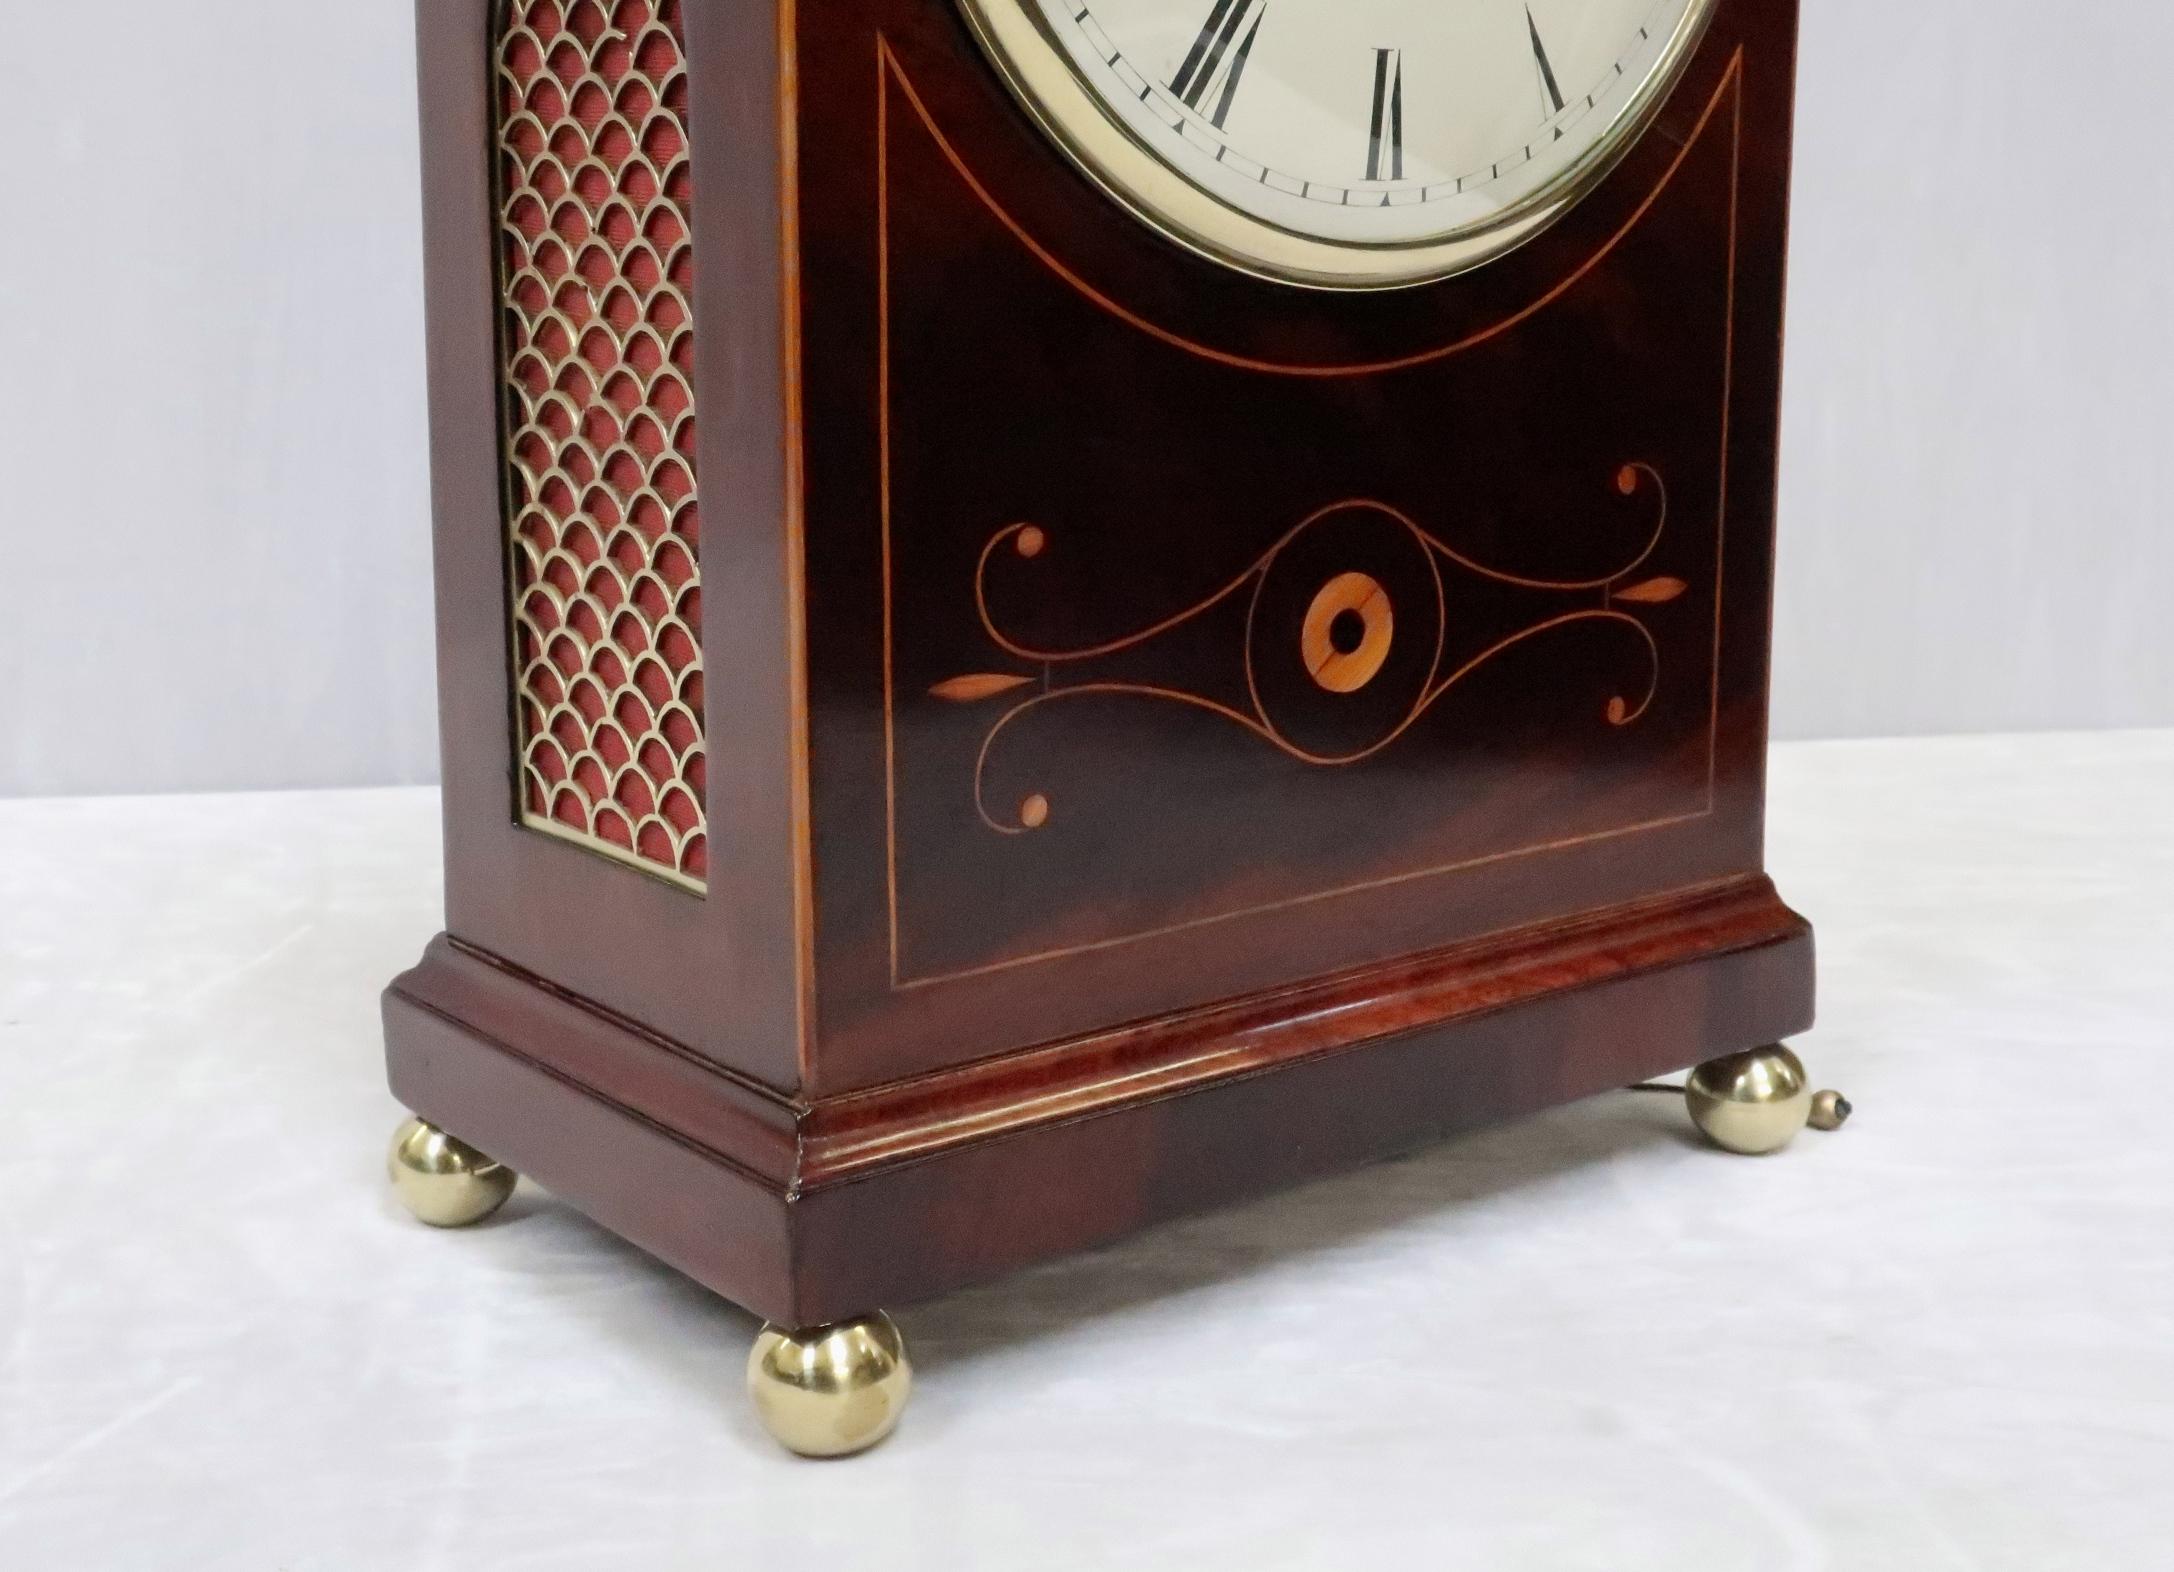 English Regency Mahogany and Inlaid Bracket Clock by Thwaites & Reed In Good Condition For Sale In Macclesfield, GB